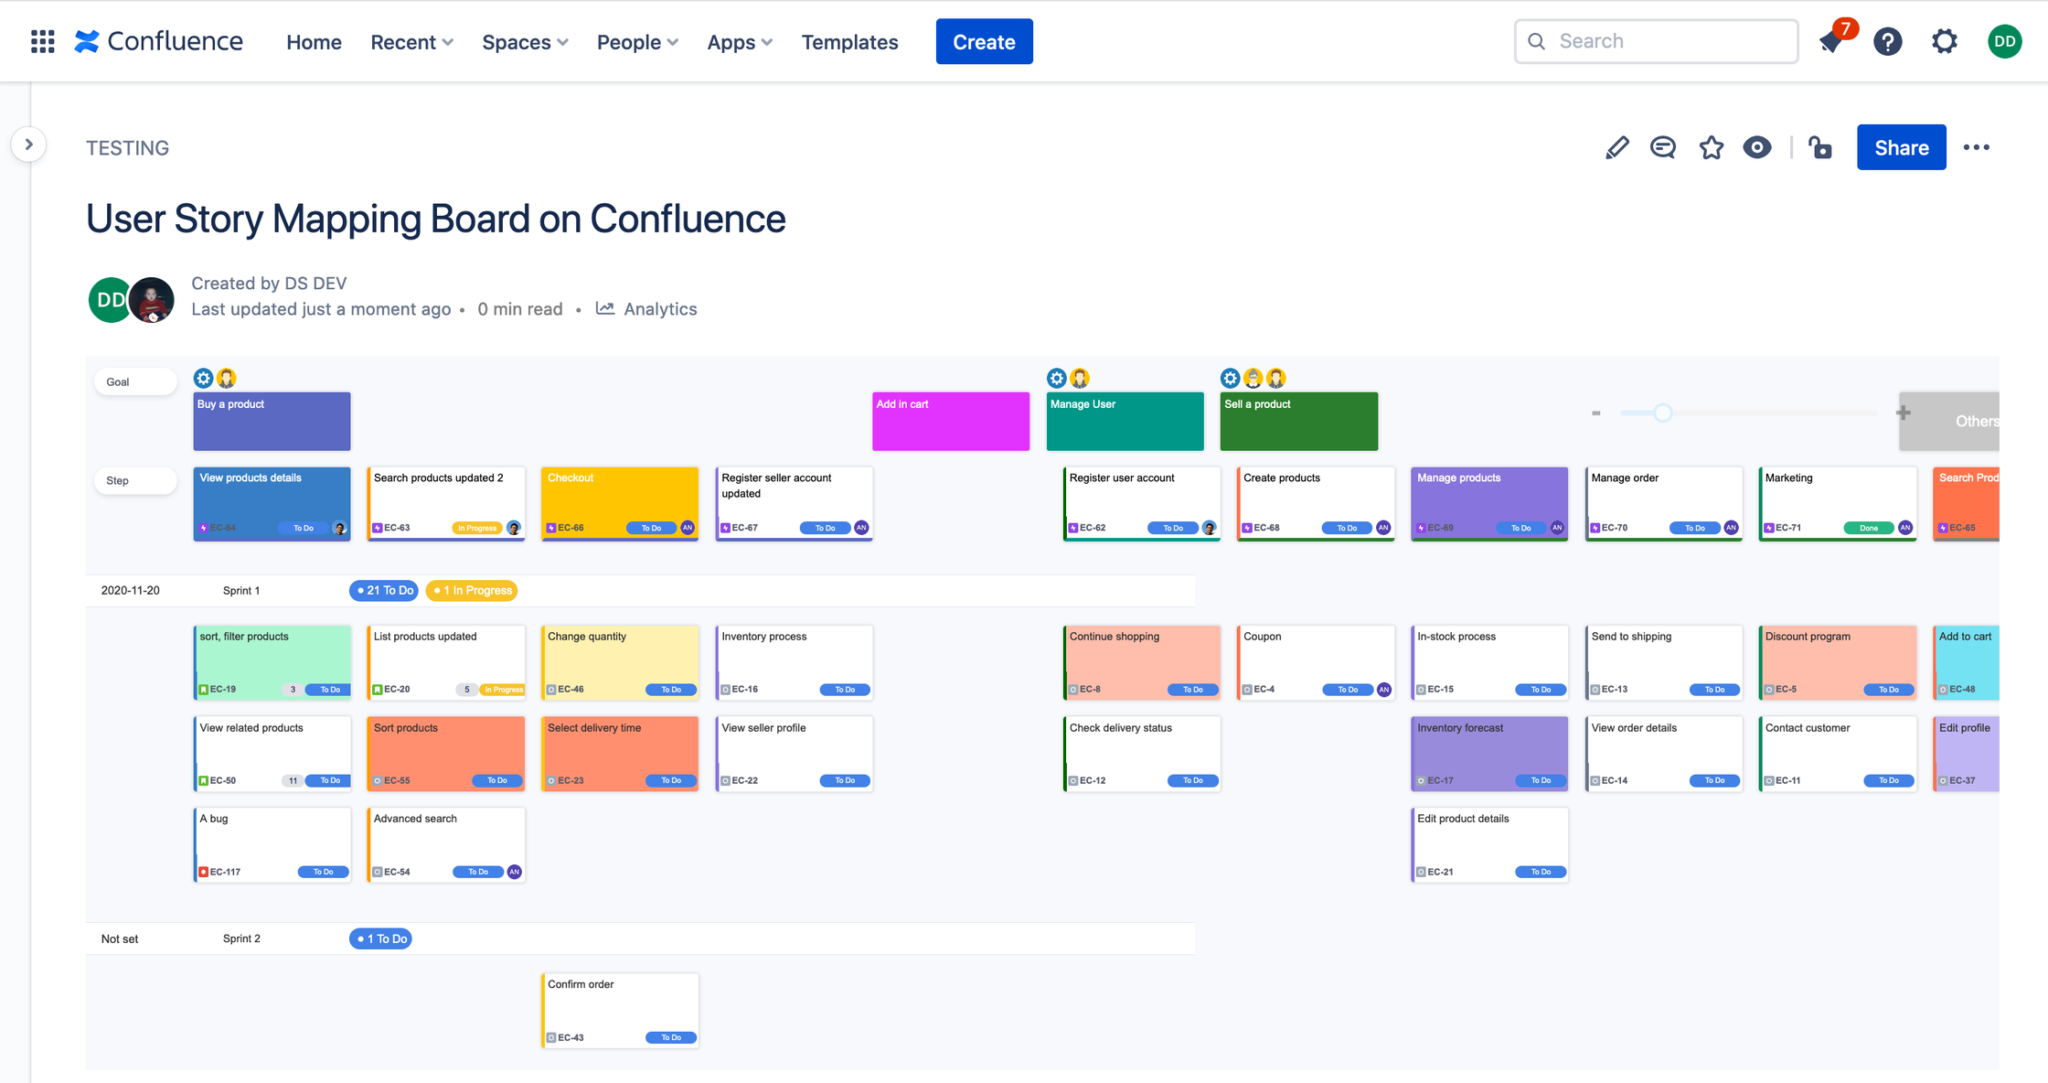 multi page journey confluence